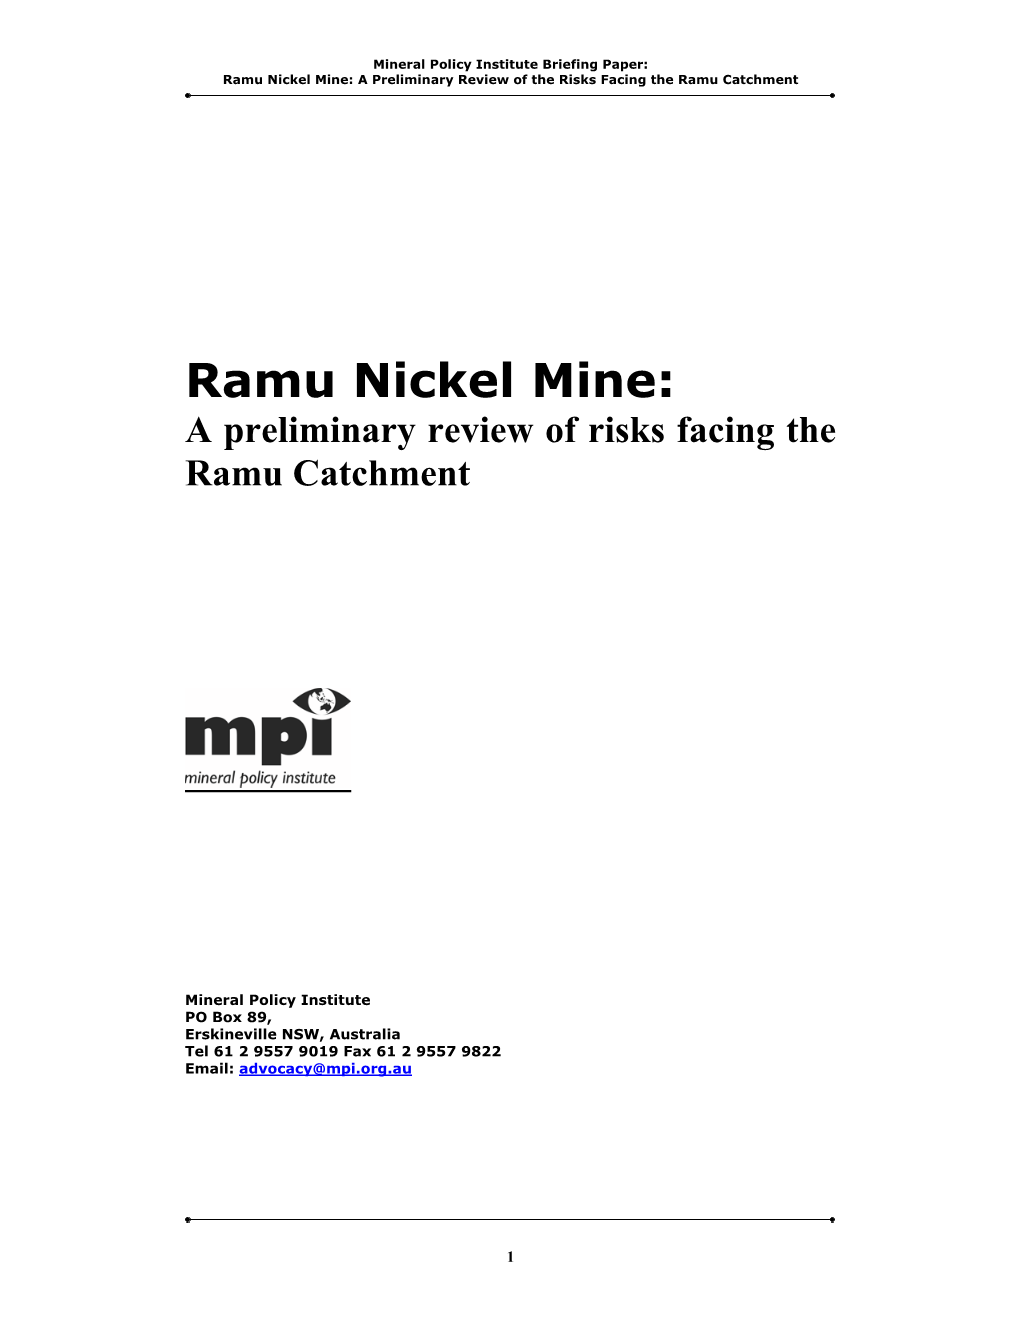 Ramu Nickel Mine: a Preliminary Review of the Risks Facing the Ramu Catchment